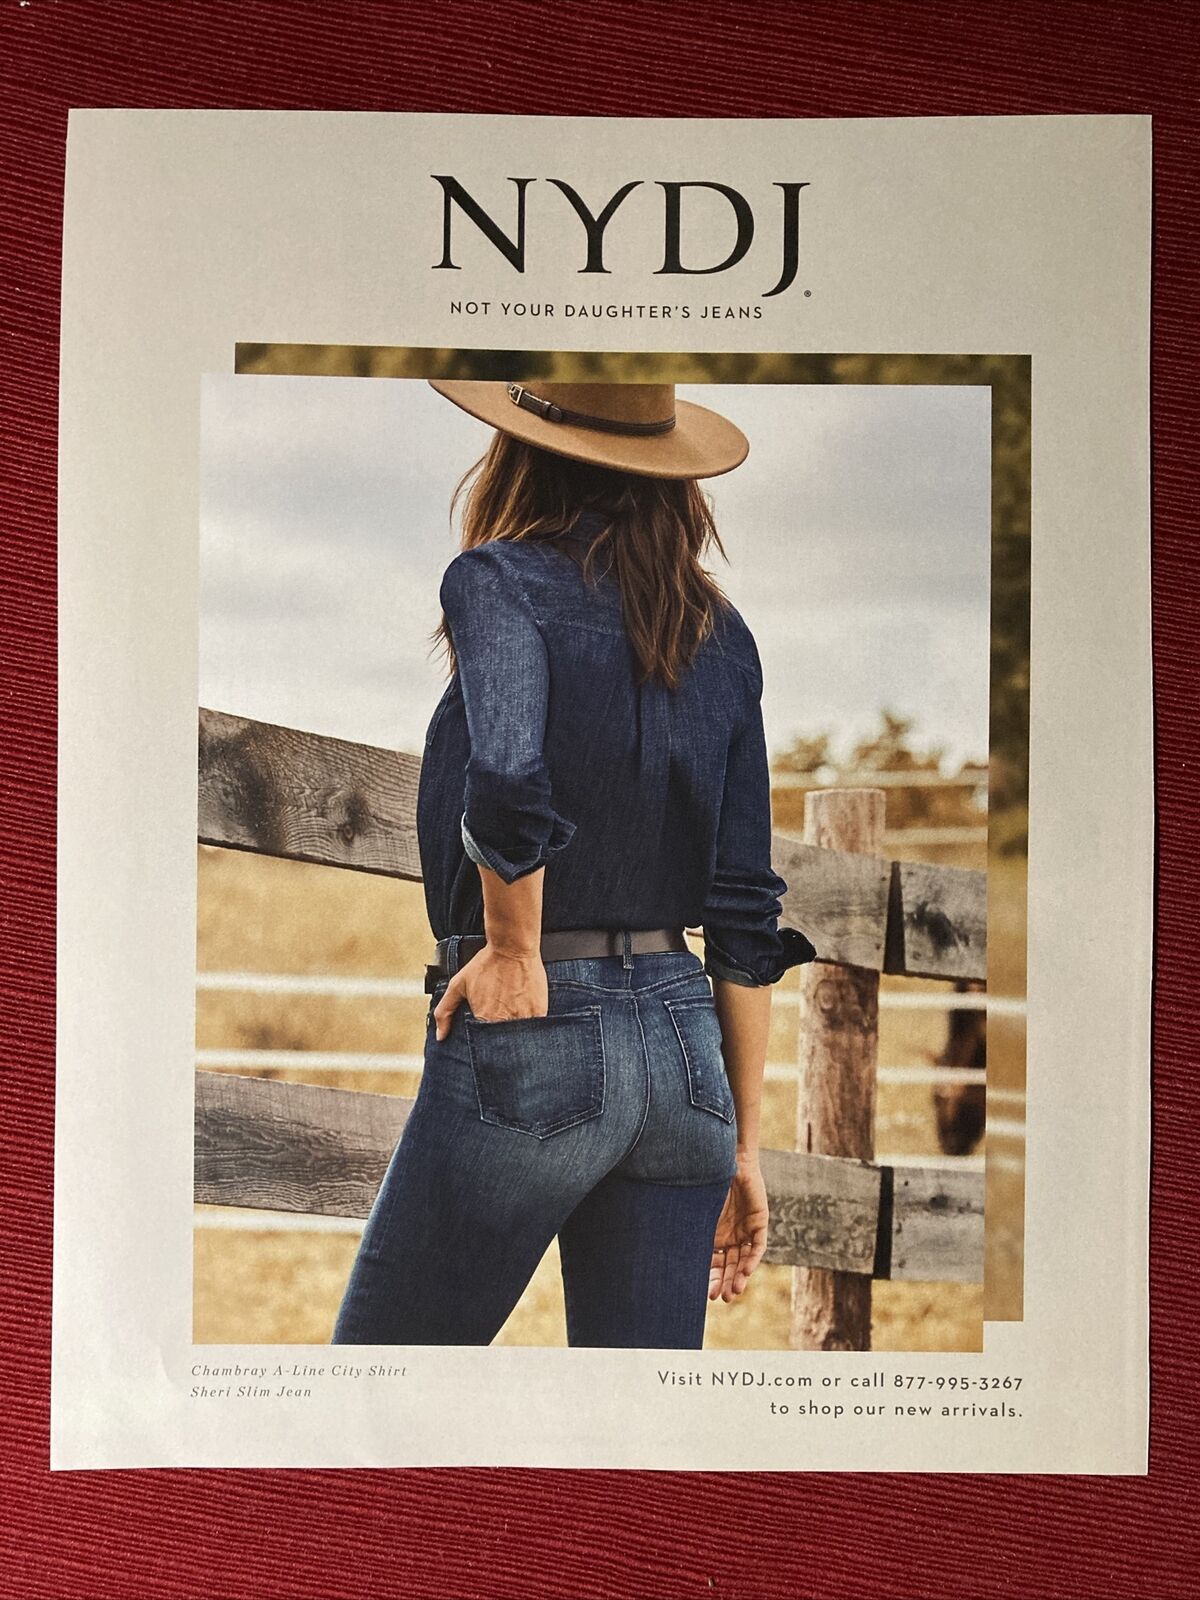 NYDJ Not Your Daughters Jeans Sexy Woman’s Butt 2019 Print Ad - Great To Frame